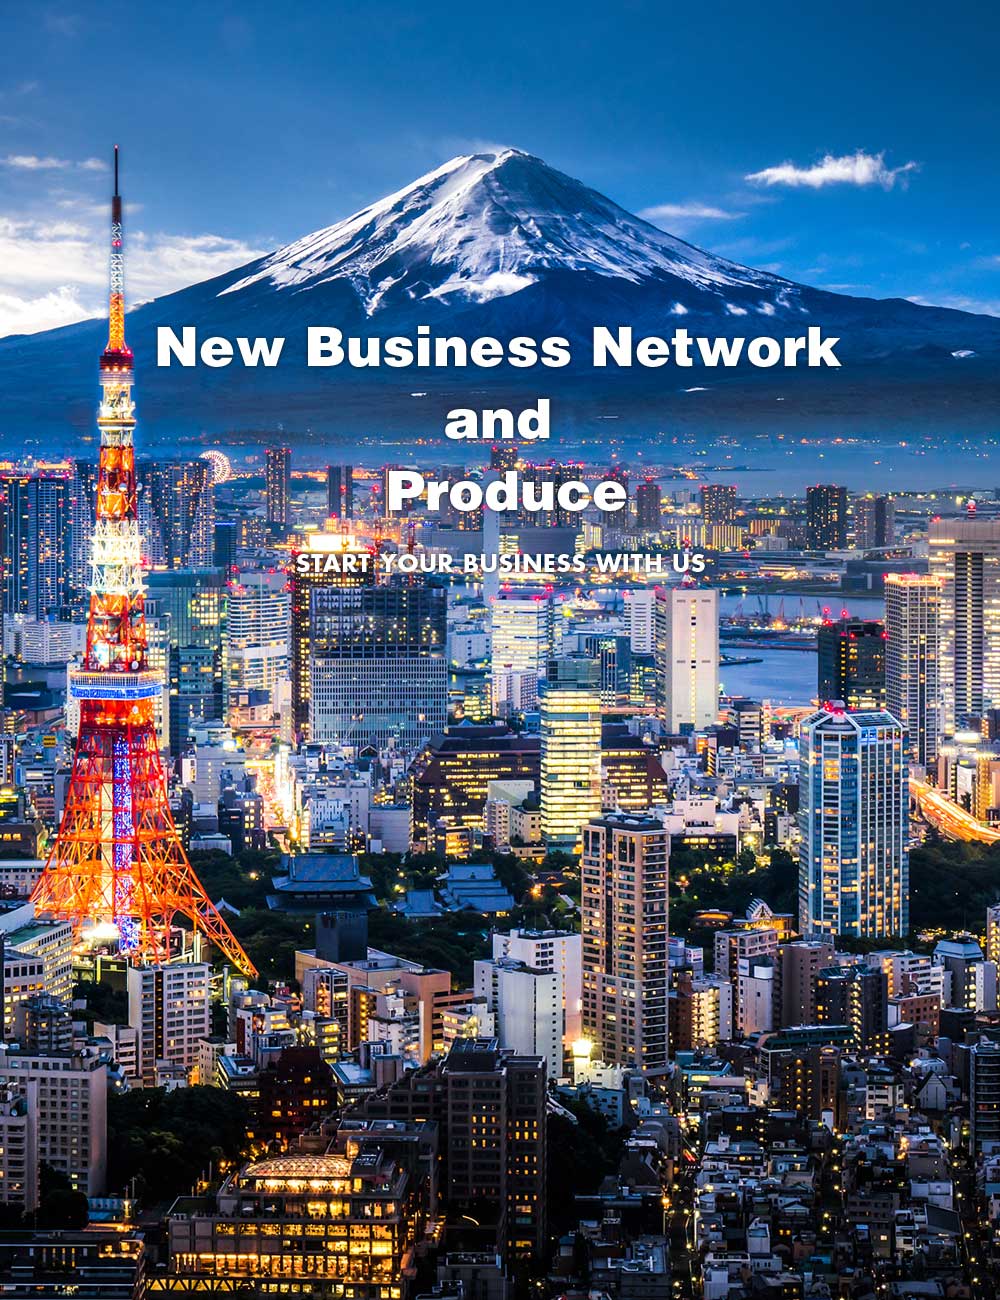 New business network and produce